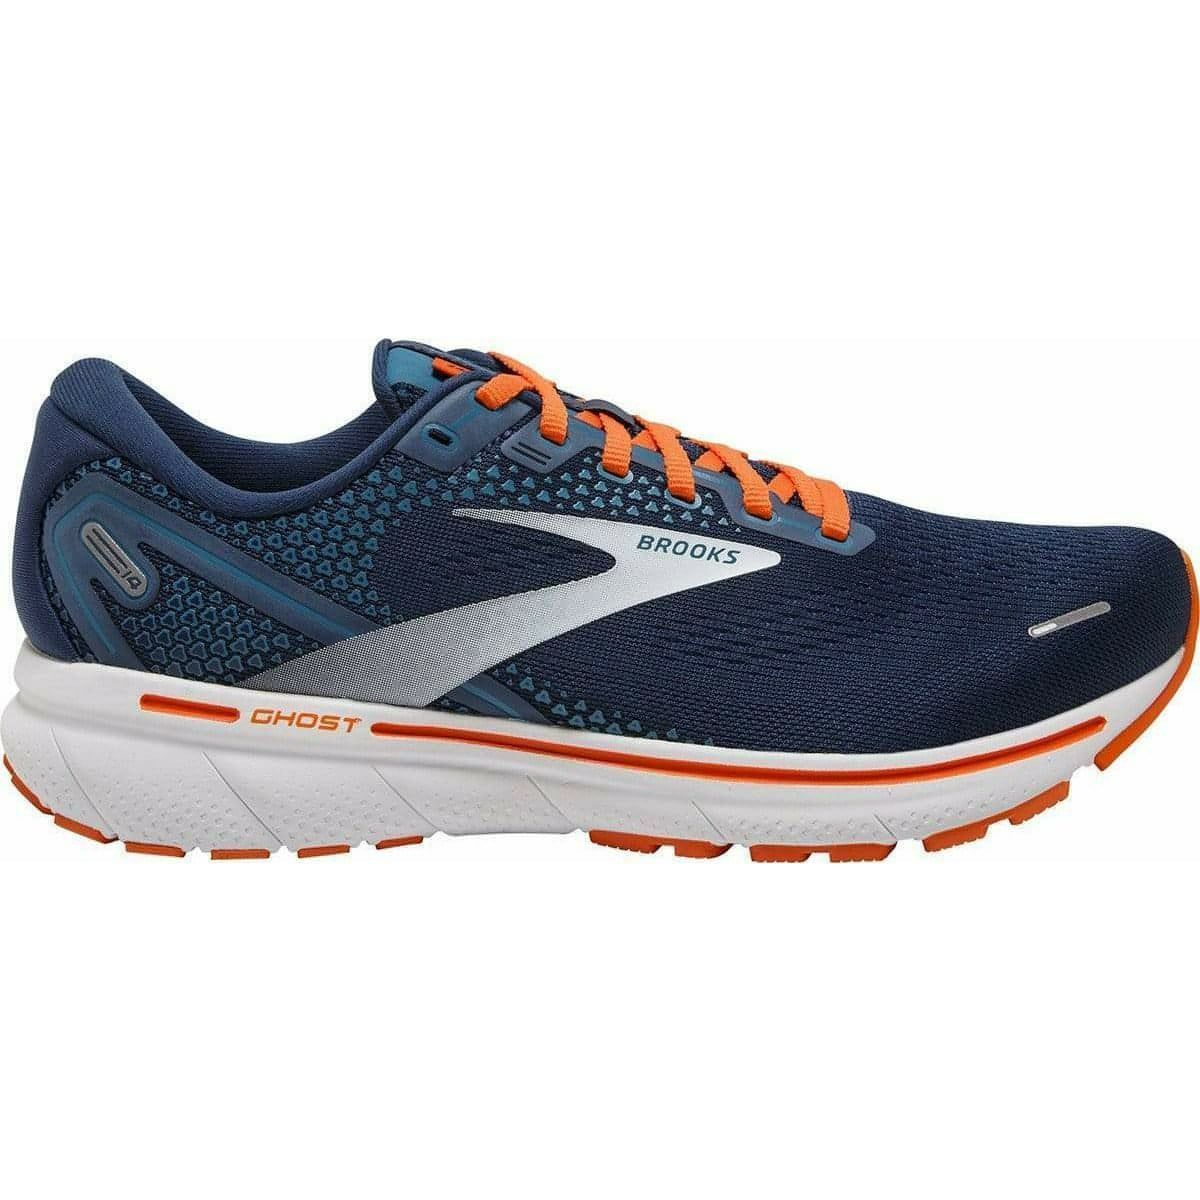 Brooks Ghost 14 Mens Running Shoes - Blue